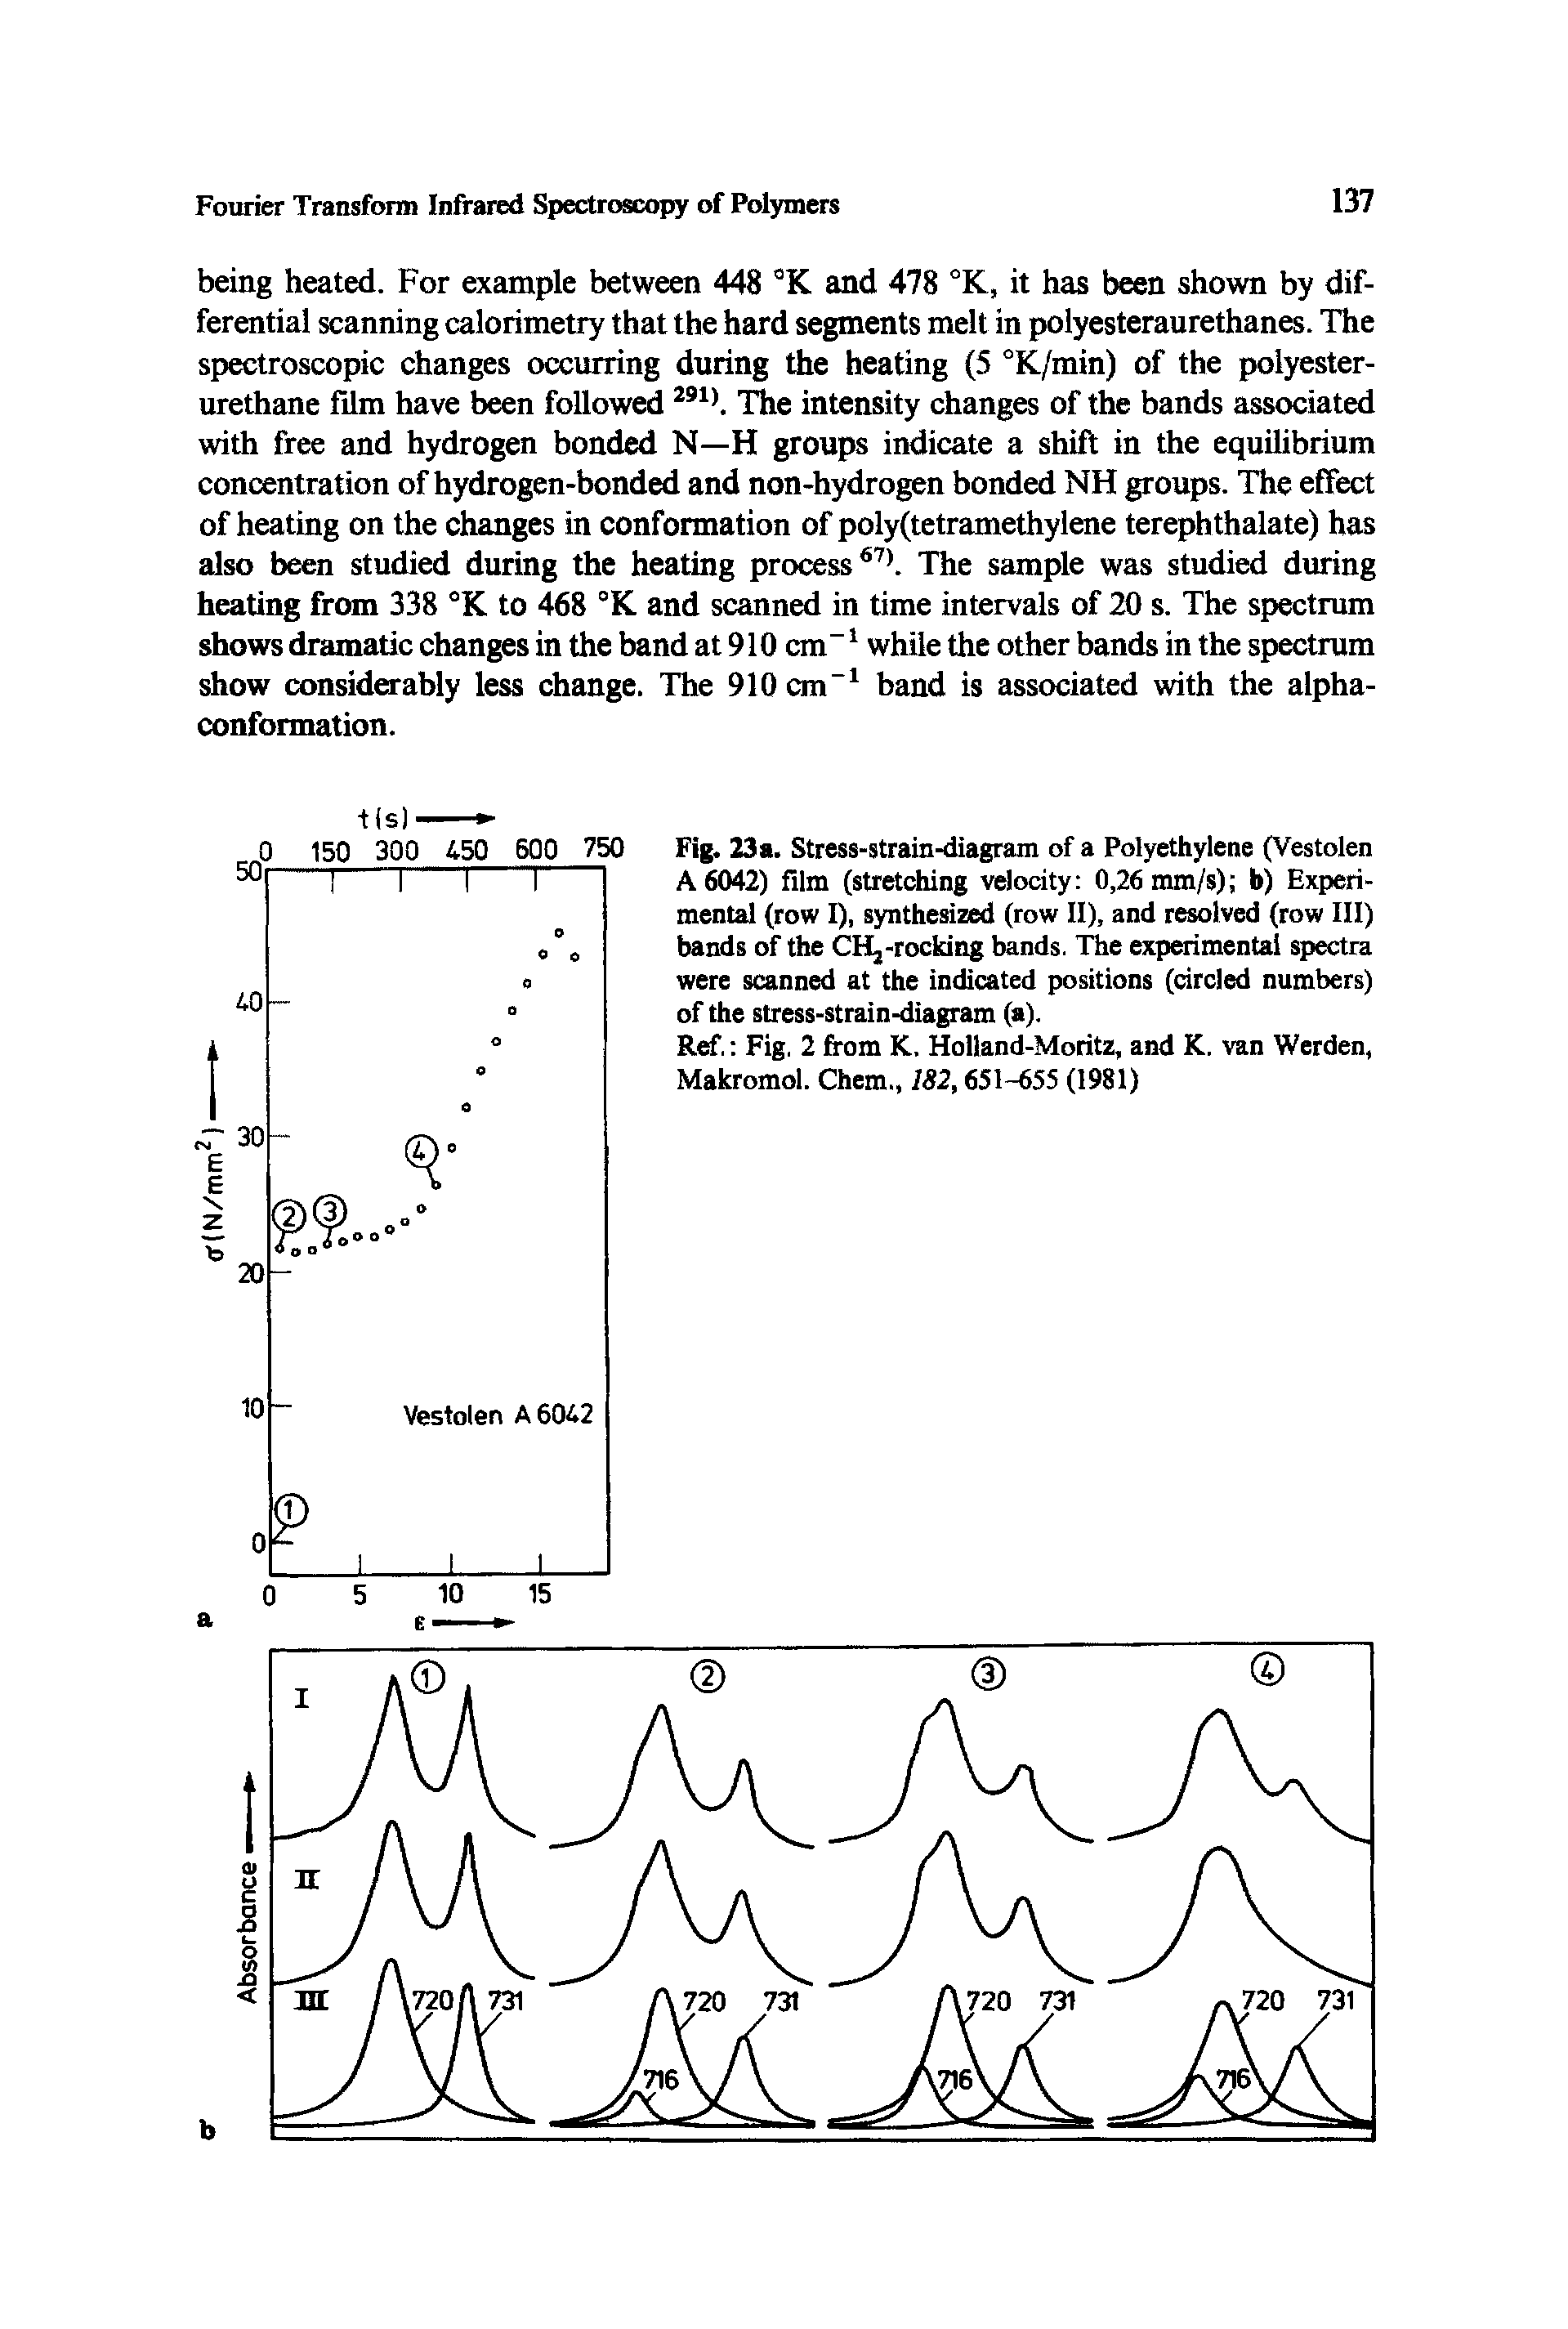 Fig. 23a. Stress-strain-diagram of a Polyethylene (Vestolen A 6042) film (stretching velocity 0,26 mm/s) b) Experimental (row I), synthesized (row II), and resolved (row III) bands of the CHj-rocking bands. The experimental spectra were scanned at the indicated positions (circled numbers) of the stress-strain-diagram (a).